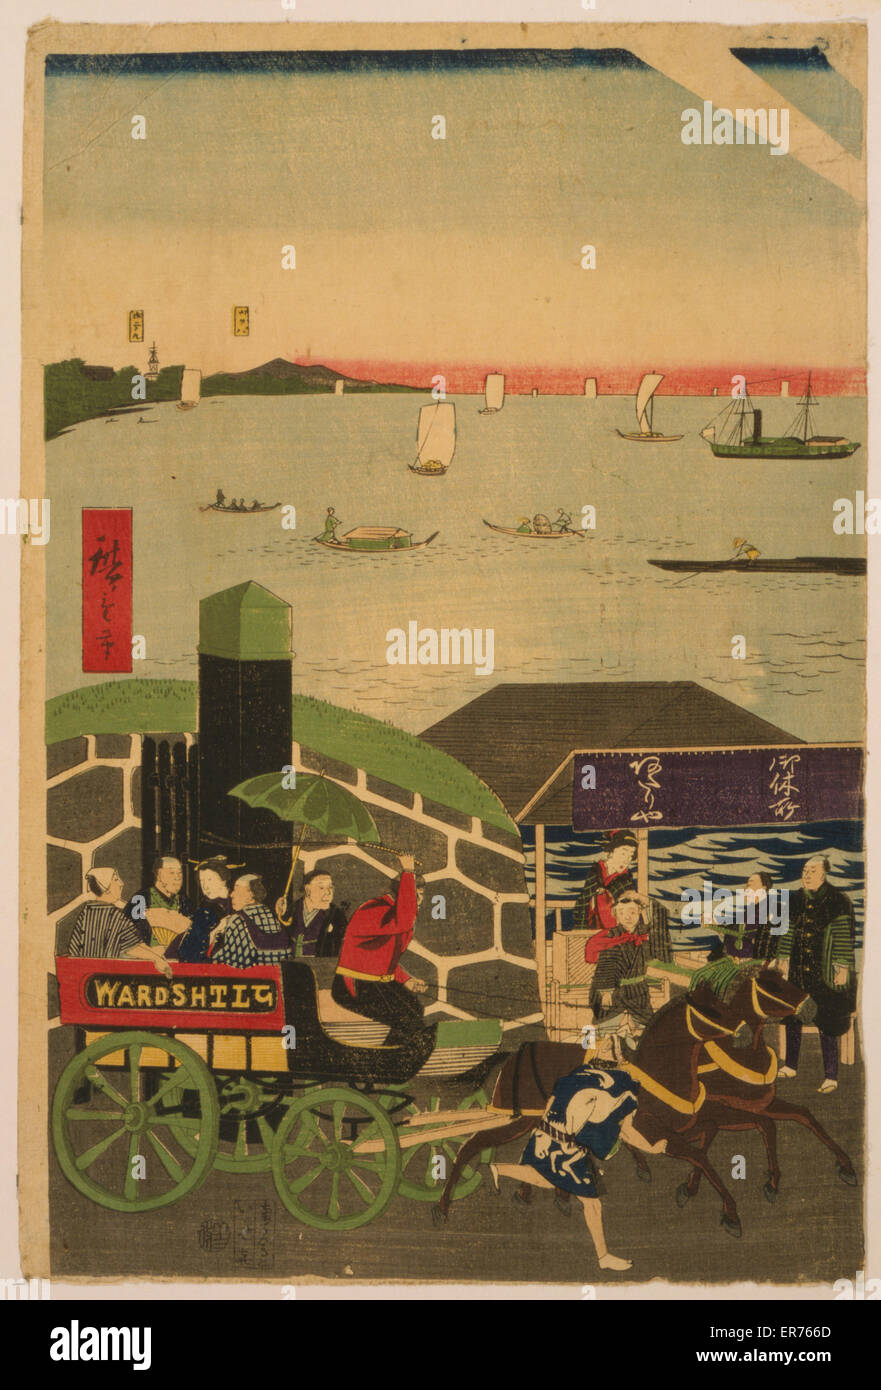 Famous places in Tokyo: real view of Takanawa. Japanese triptych print showing a busy street with people walking; riding in carriages, on horseback, and in a litter; many small and large boats sail in a sea; the sun rises in the background. Date 1870. Stock Photo